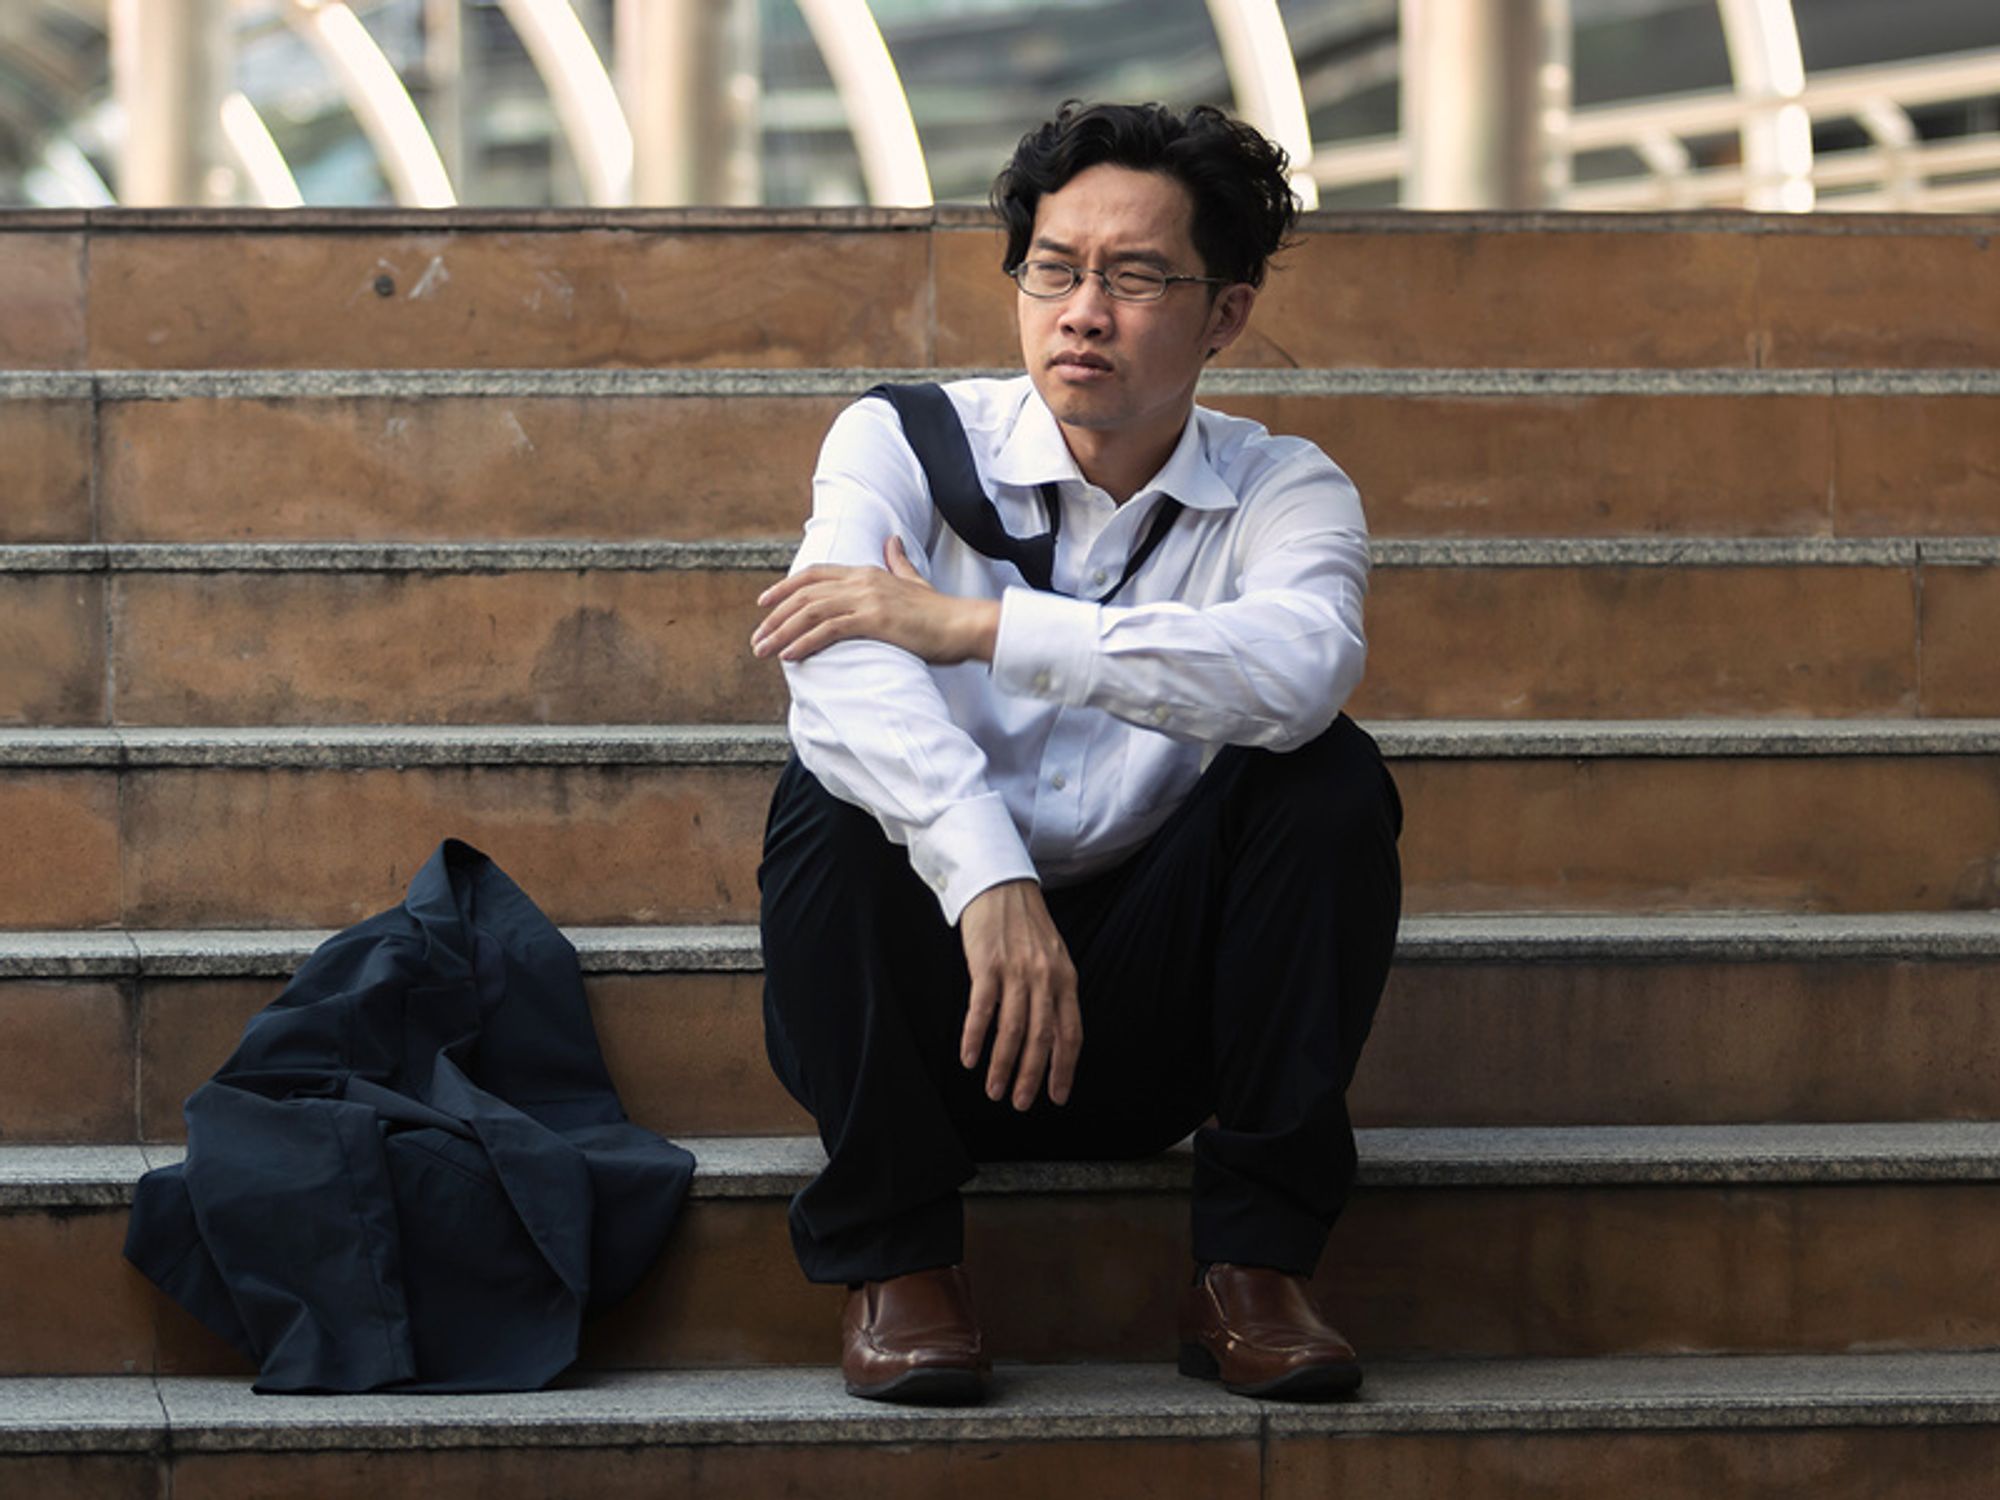 Young professional man sitting on steps, feeling upset that he's unemployed.